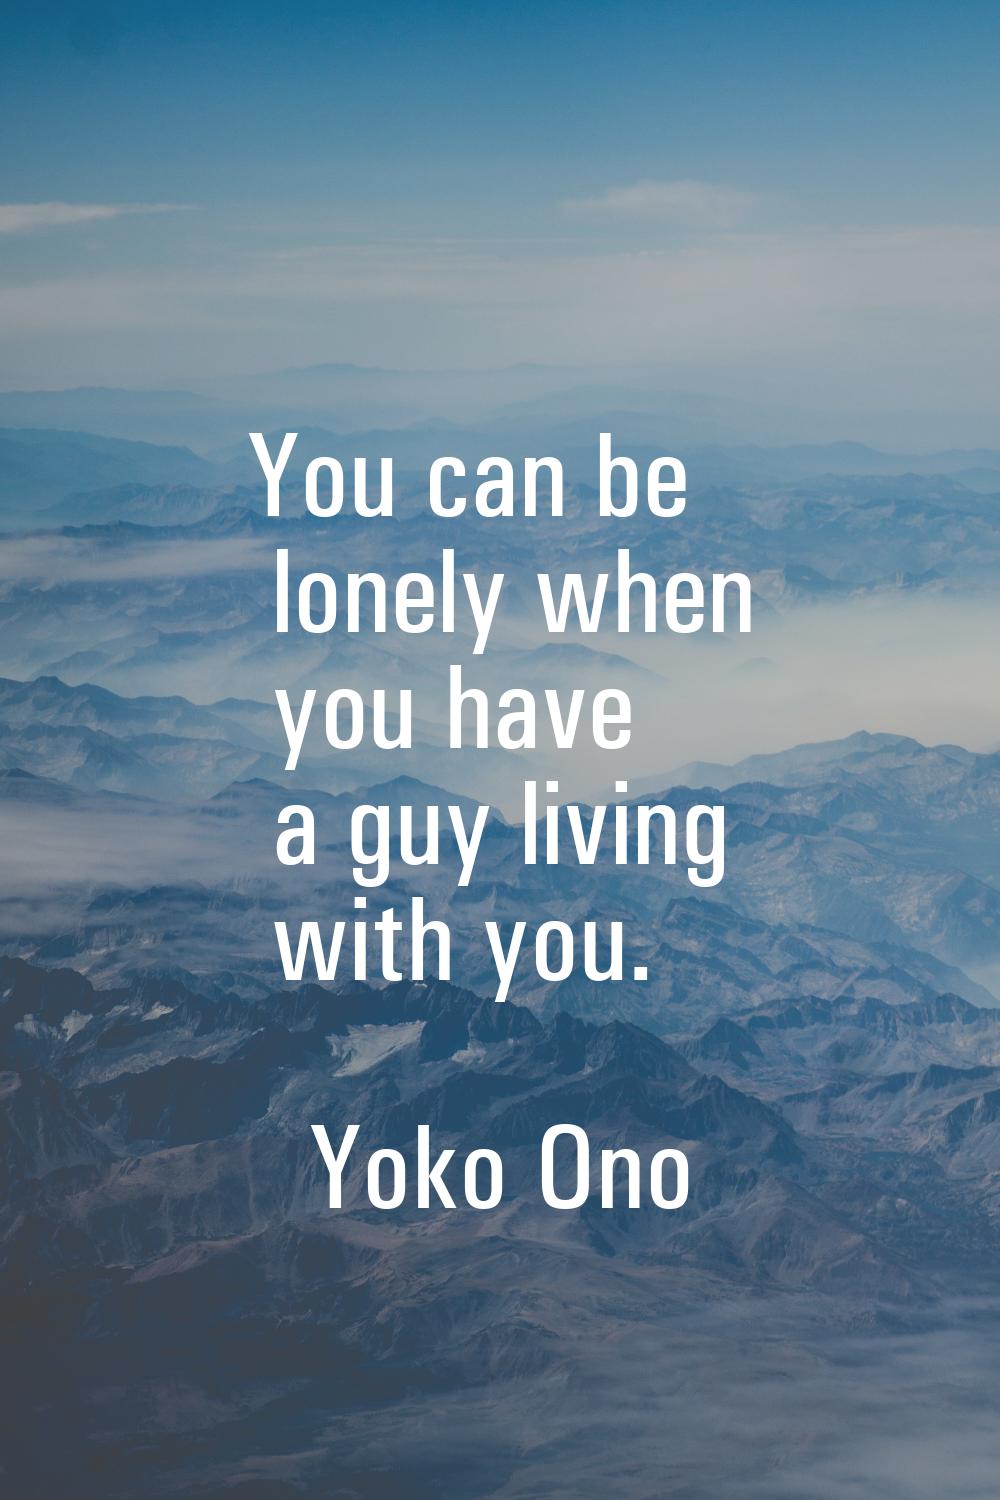 You can be lonely when you have a guy living with you.